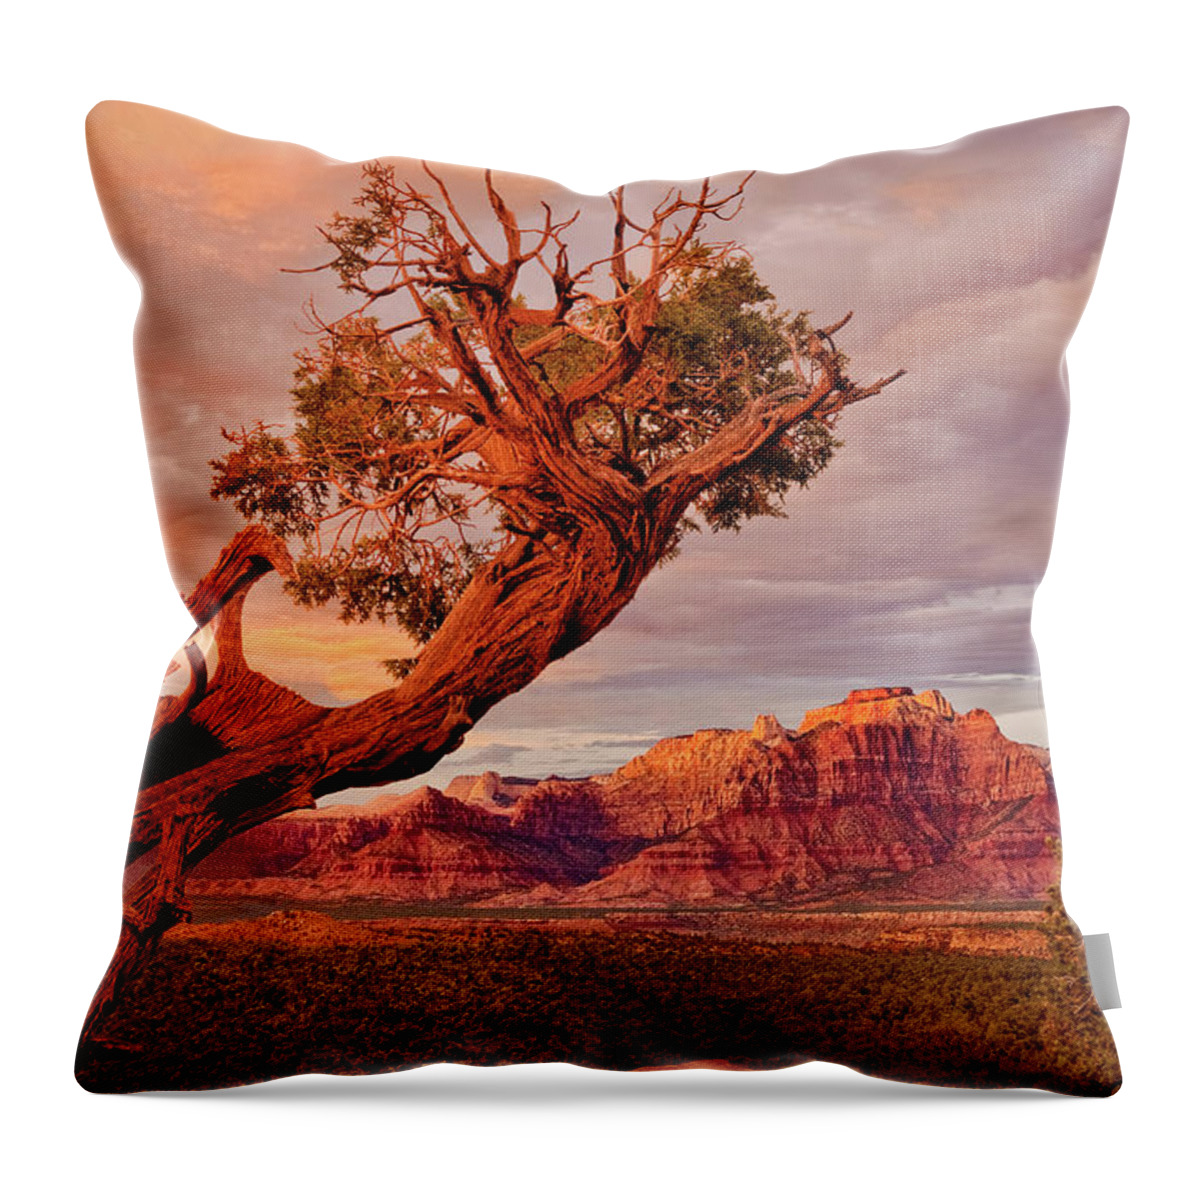 Dave Welling Throw Pillow featuring the photograph Clearing Storm And West Temple South Of Zion National Park by Dave Welling